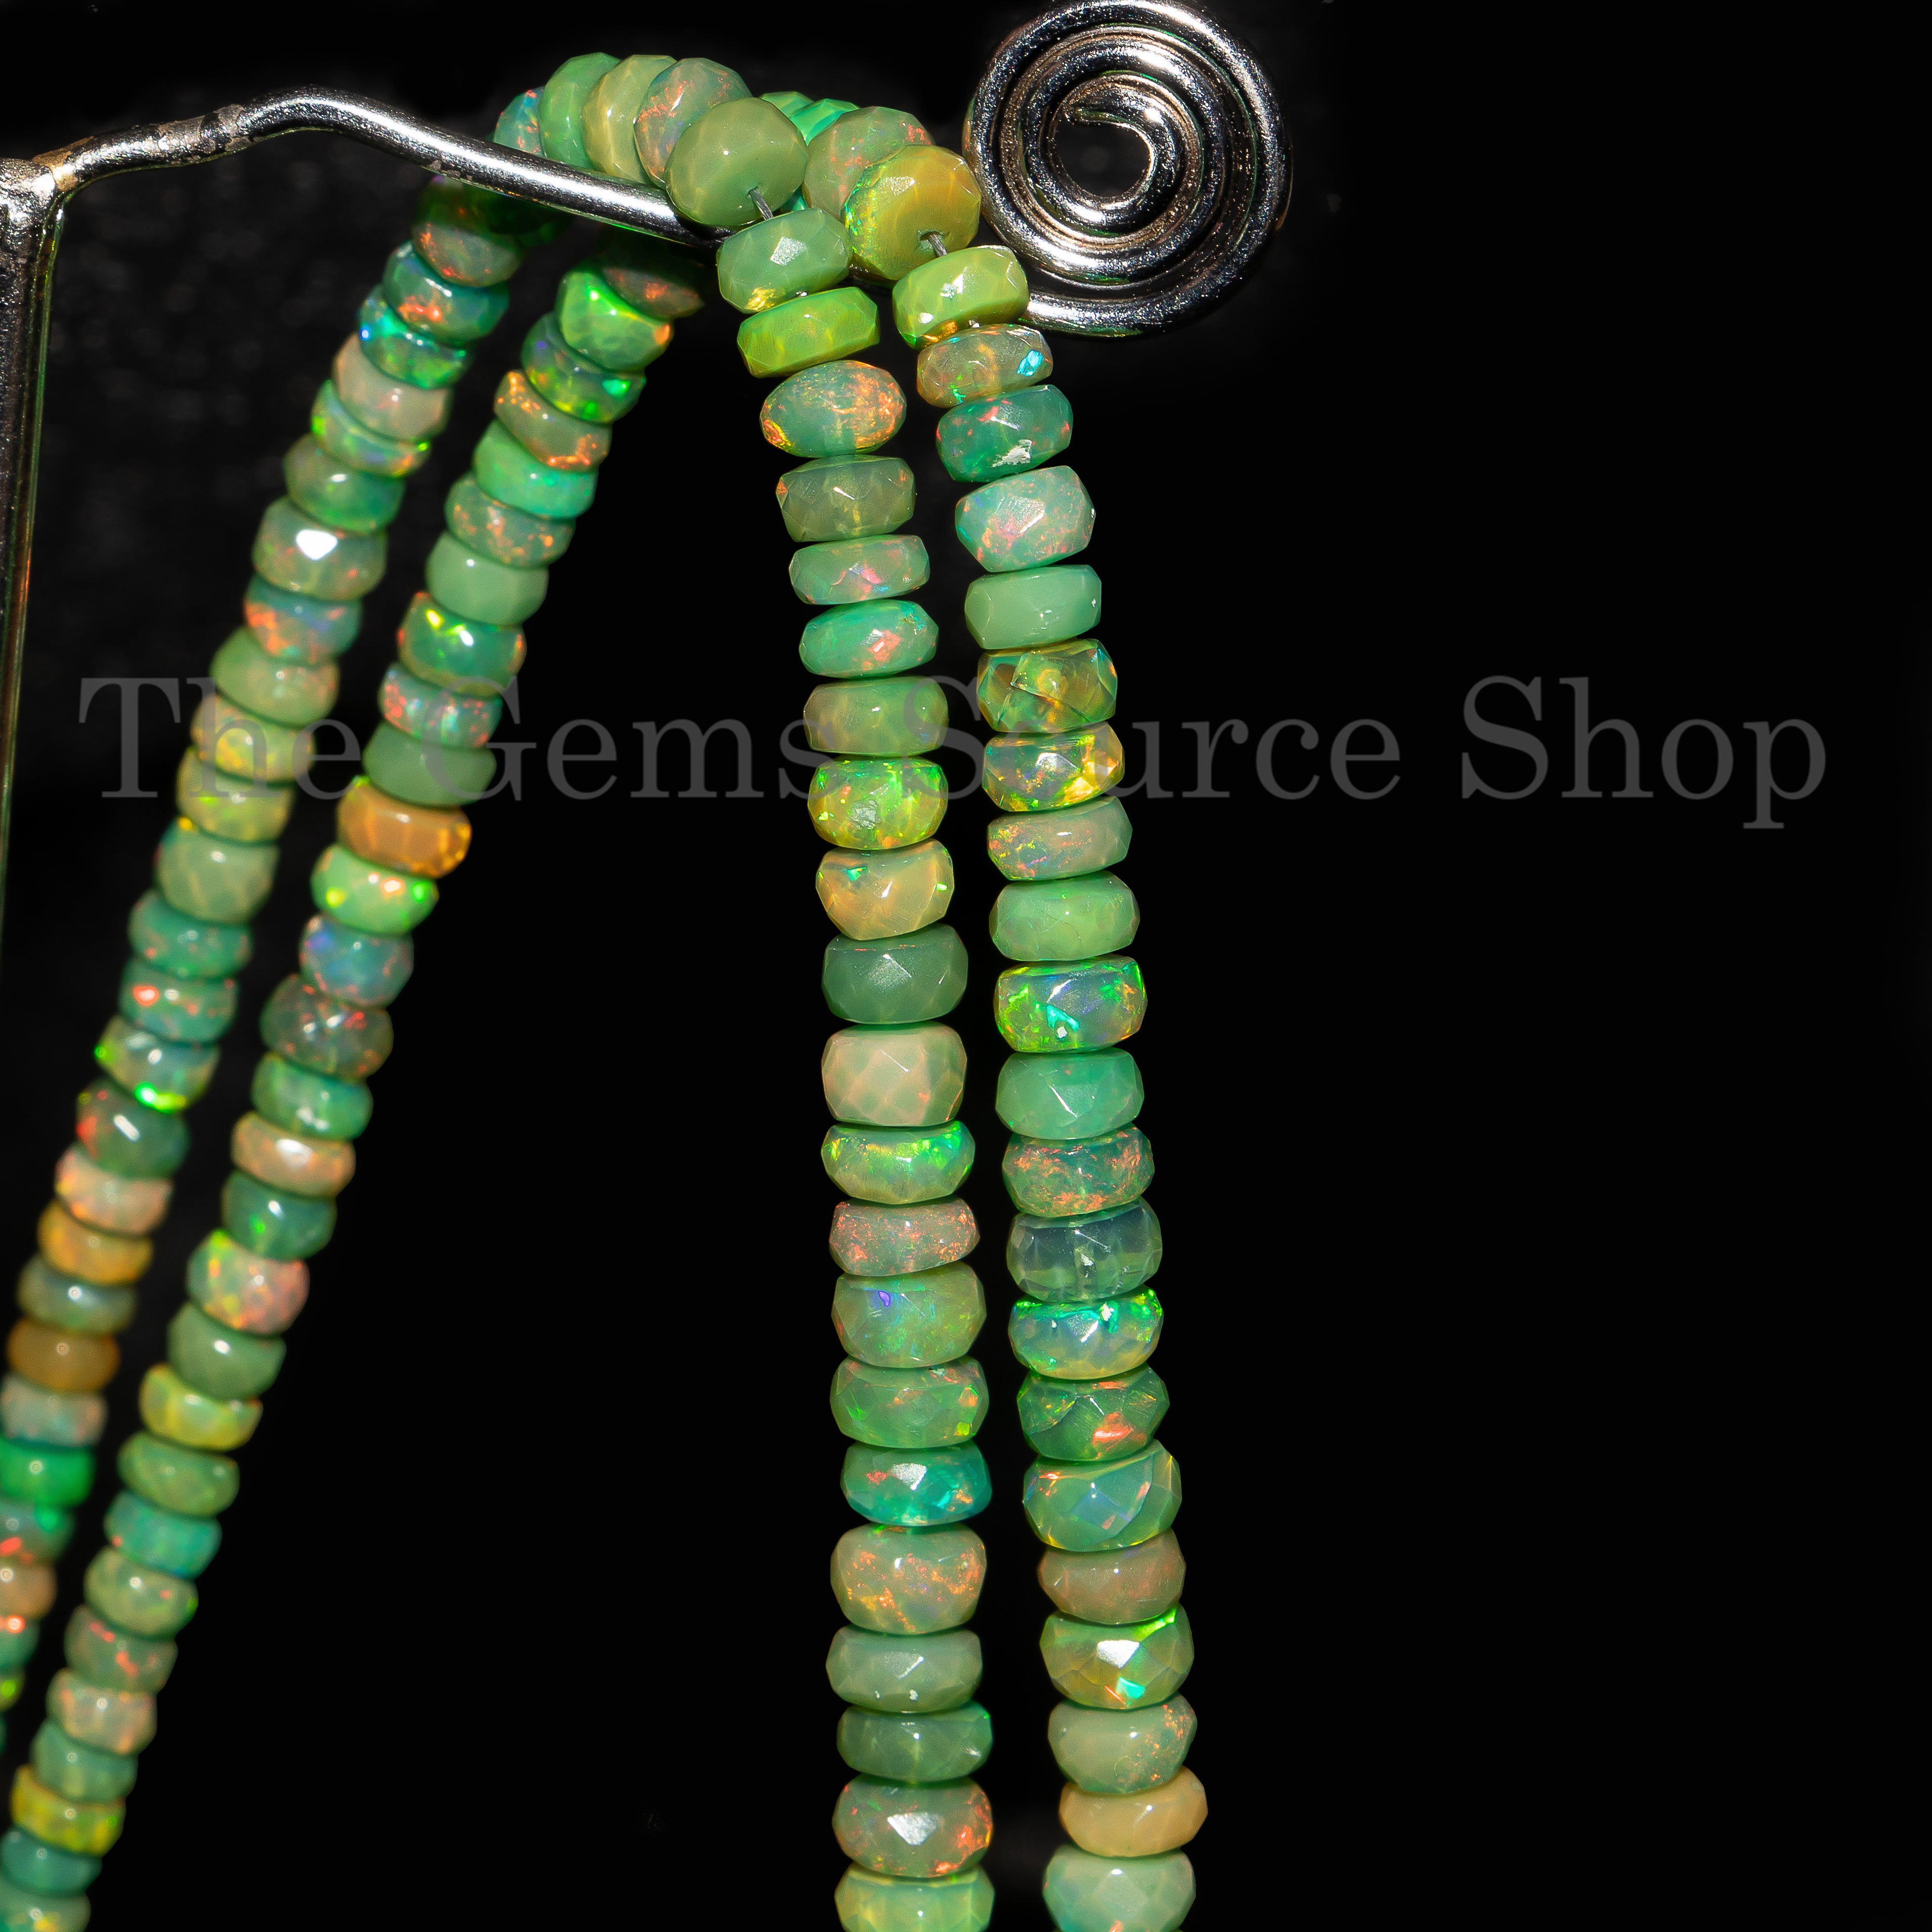 Green Opal Beads, Opal Faceted Rondelle Beads, Opal Gemstone Beads